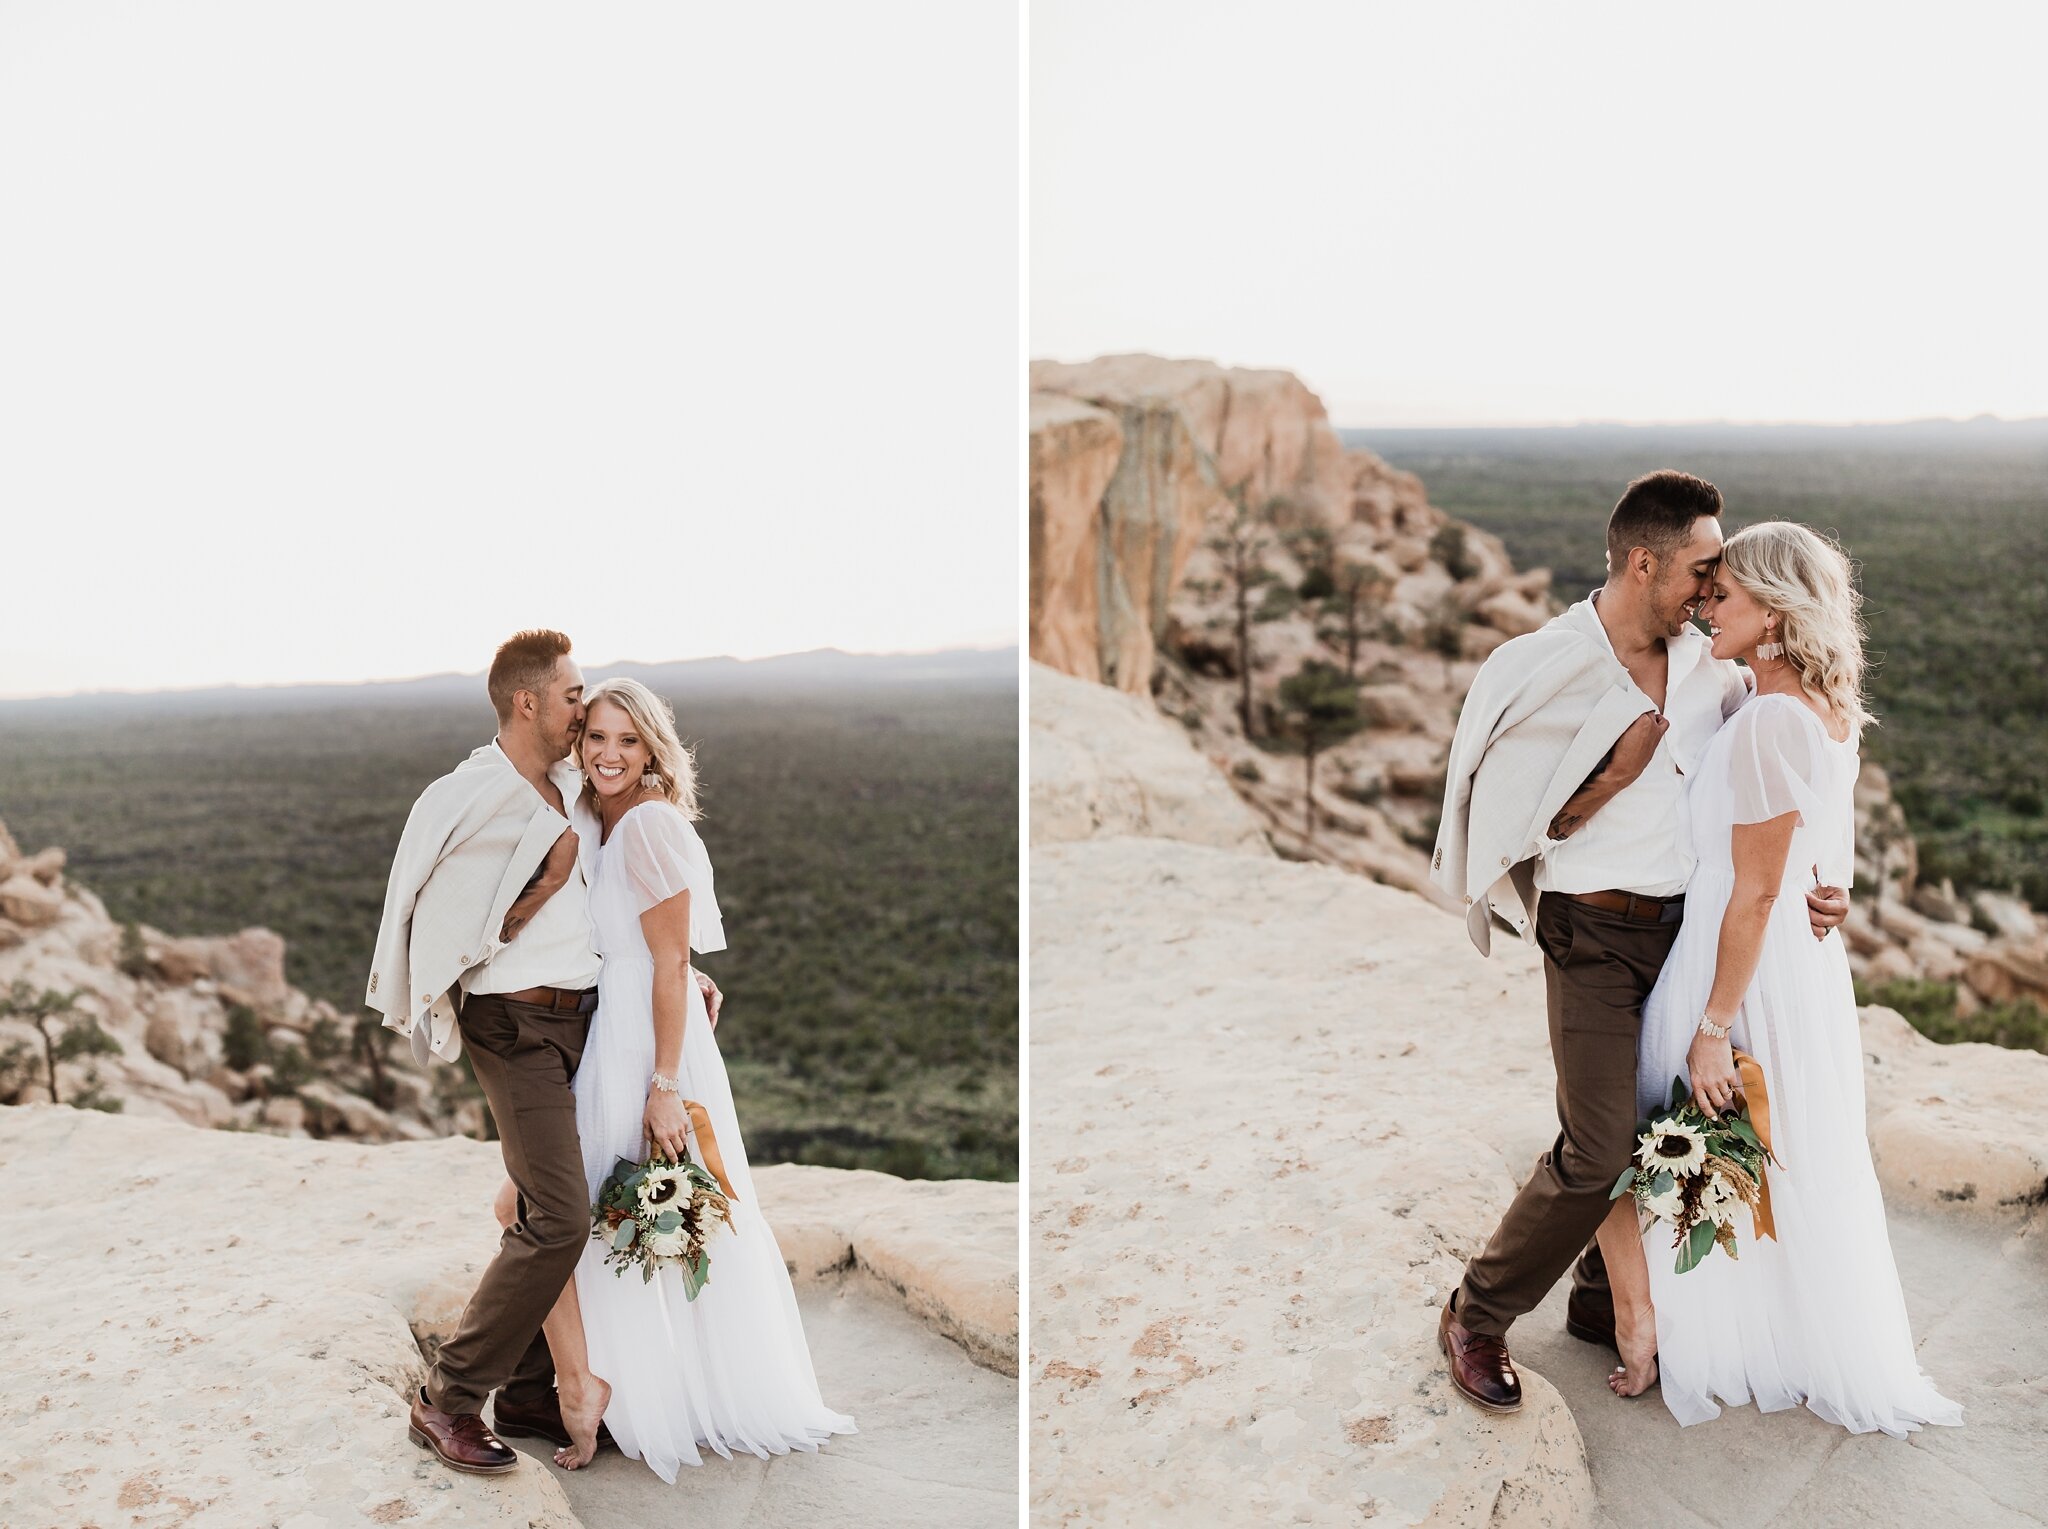 Alicia+lucia+photography+-+albuquerque+wedding+photographer+-+santa+fe+wedding+photography+-+new+mexico+wedding+photographer+-+new+mexico+wedding+-+anniversary+-+styled+anniversary+-+elopement+-+styled+elopement_0044.jpg